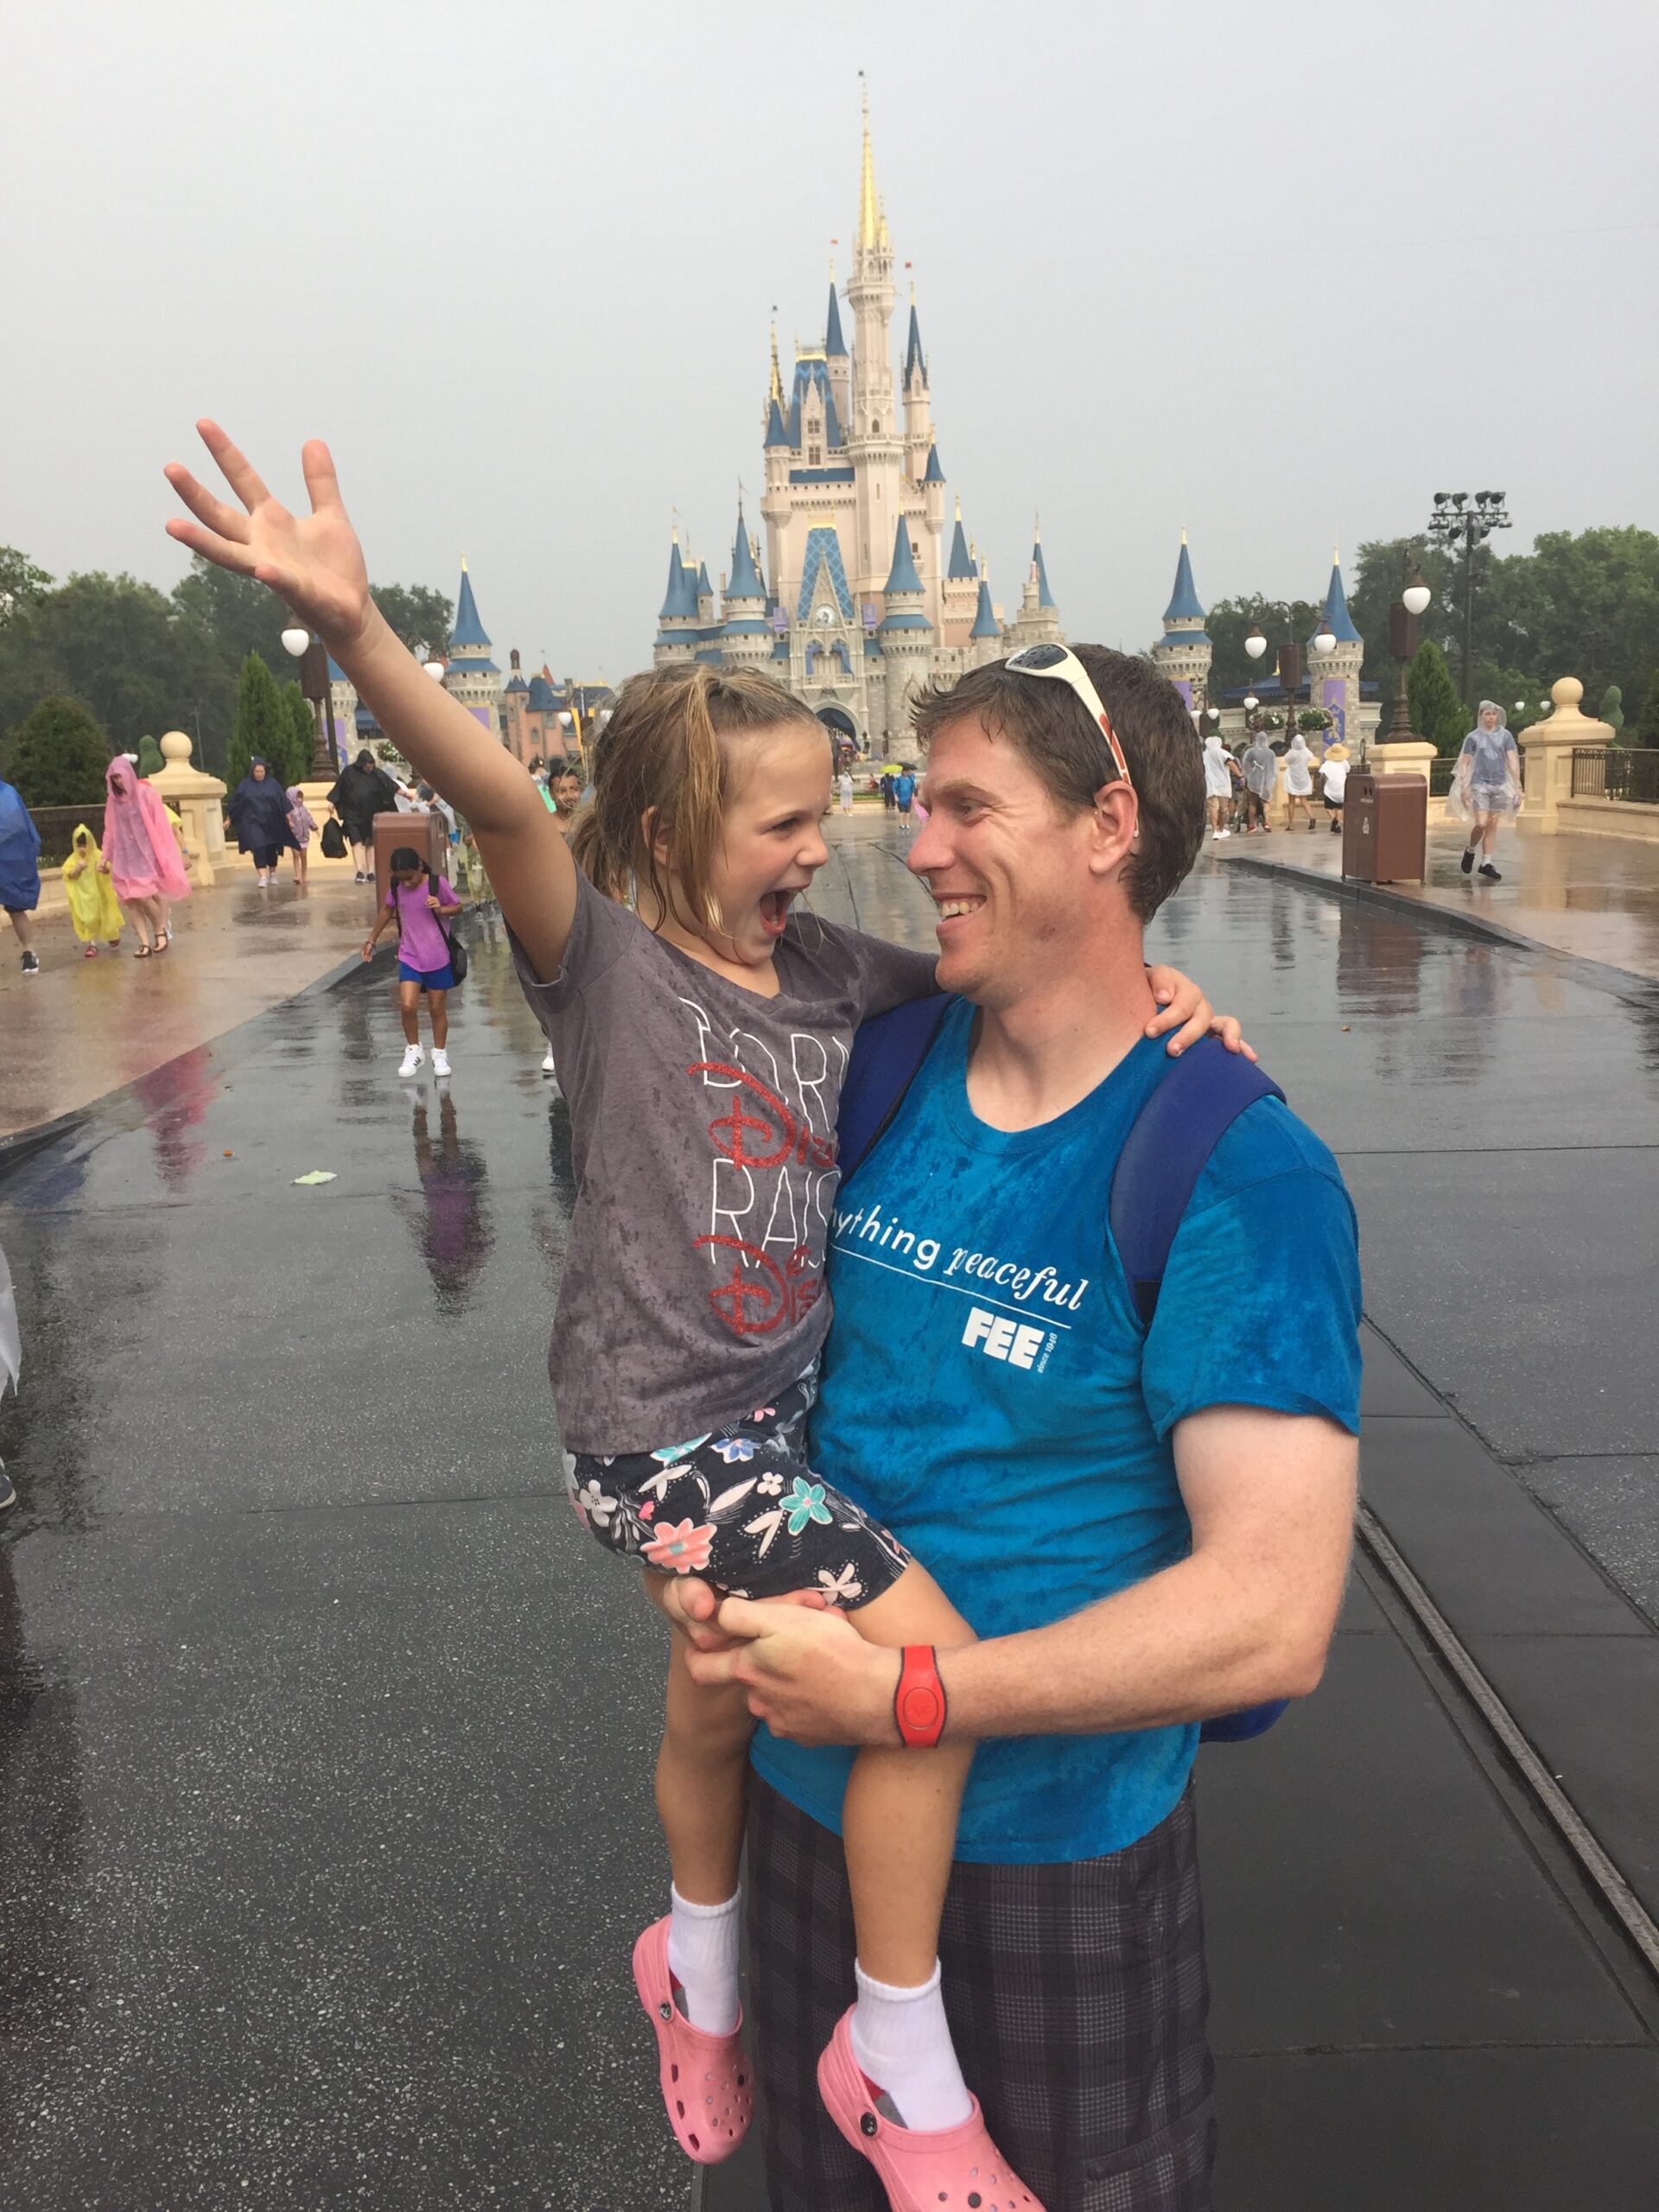 Michael Clark and his daughter smile during a rainy day at Disney World. Courtesy | Michael Clark